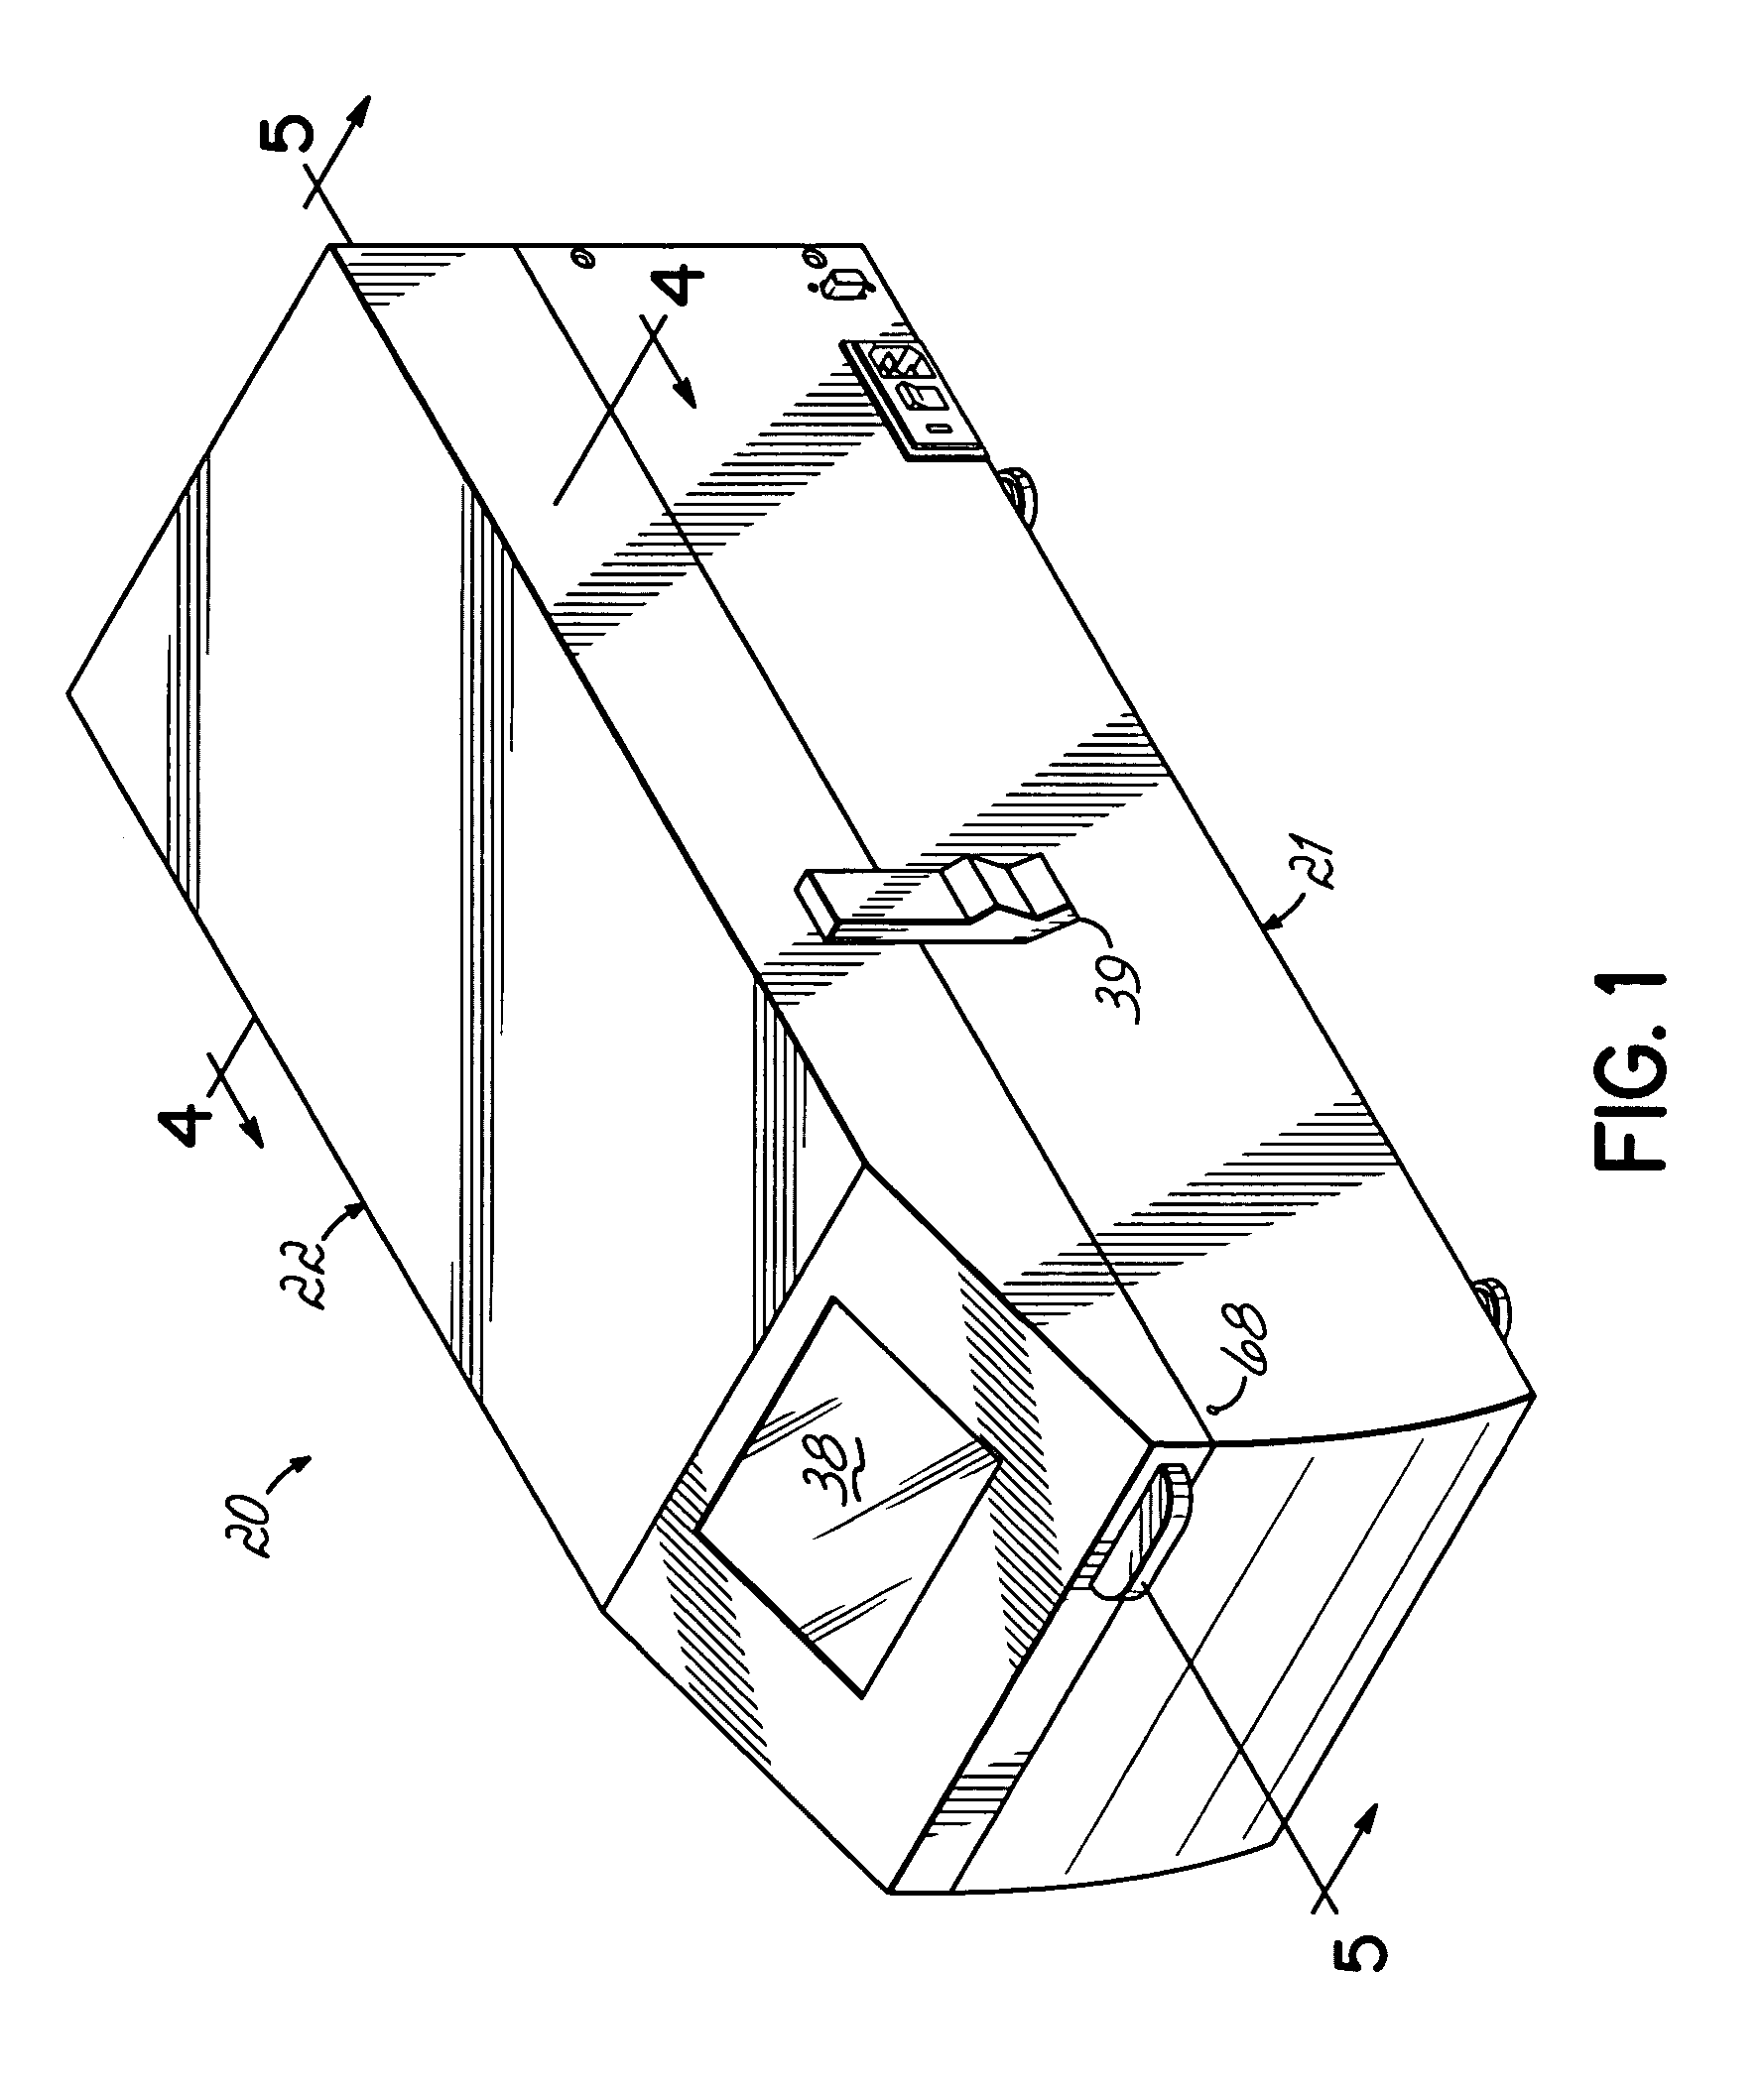 Slide treatment apparatus and methods for use